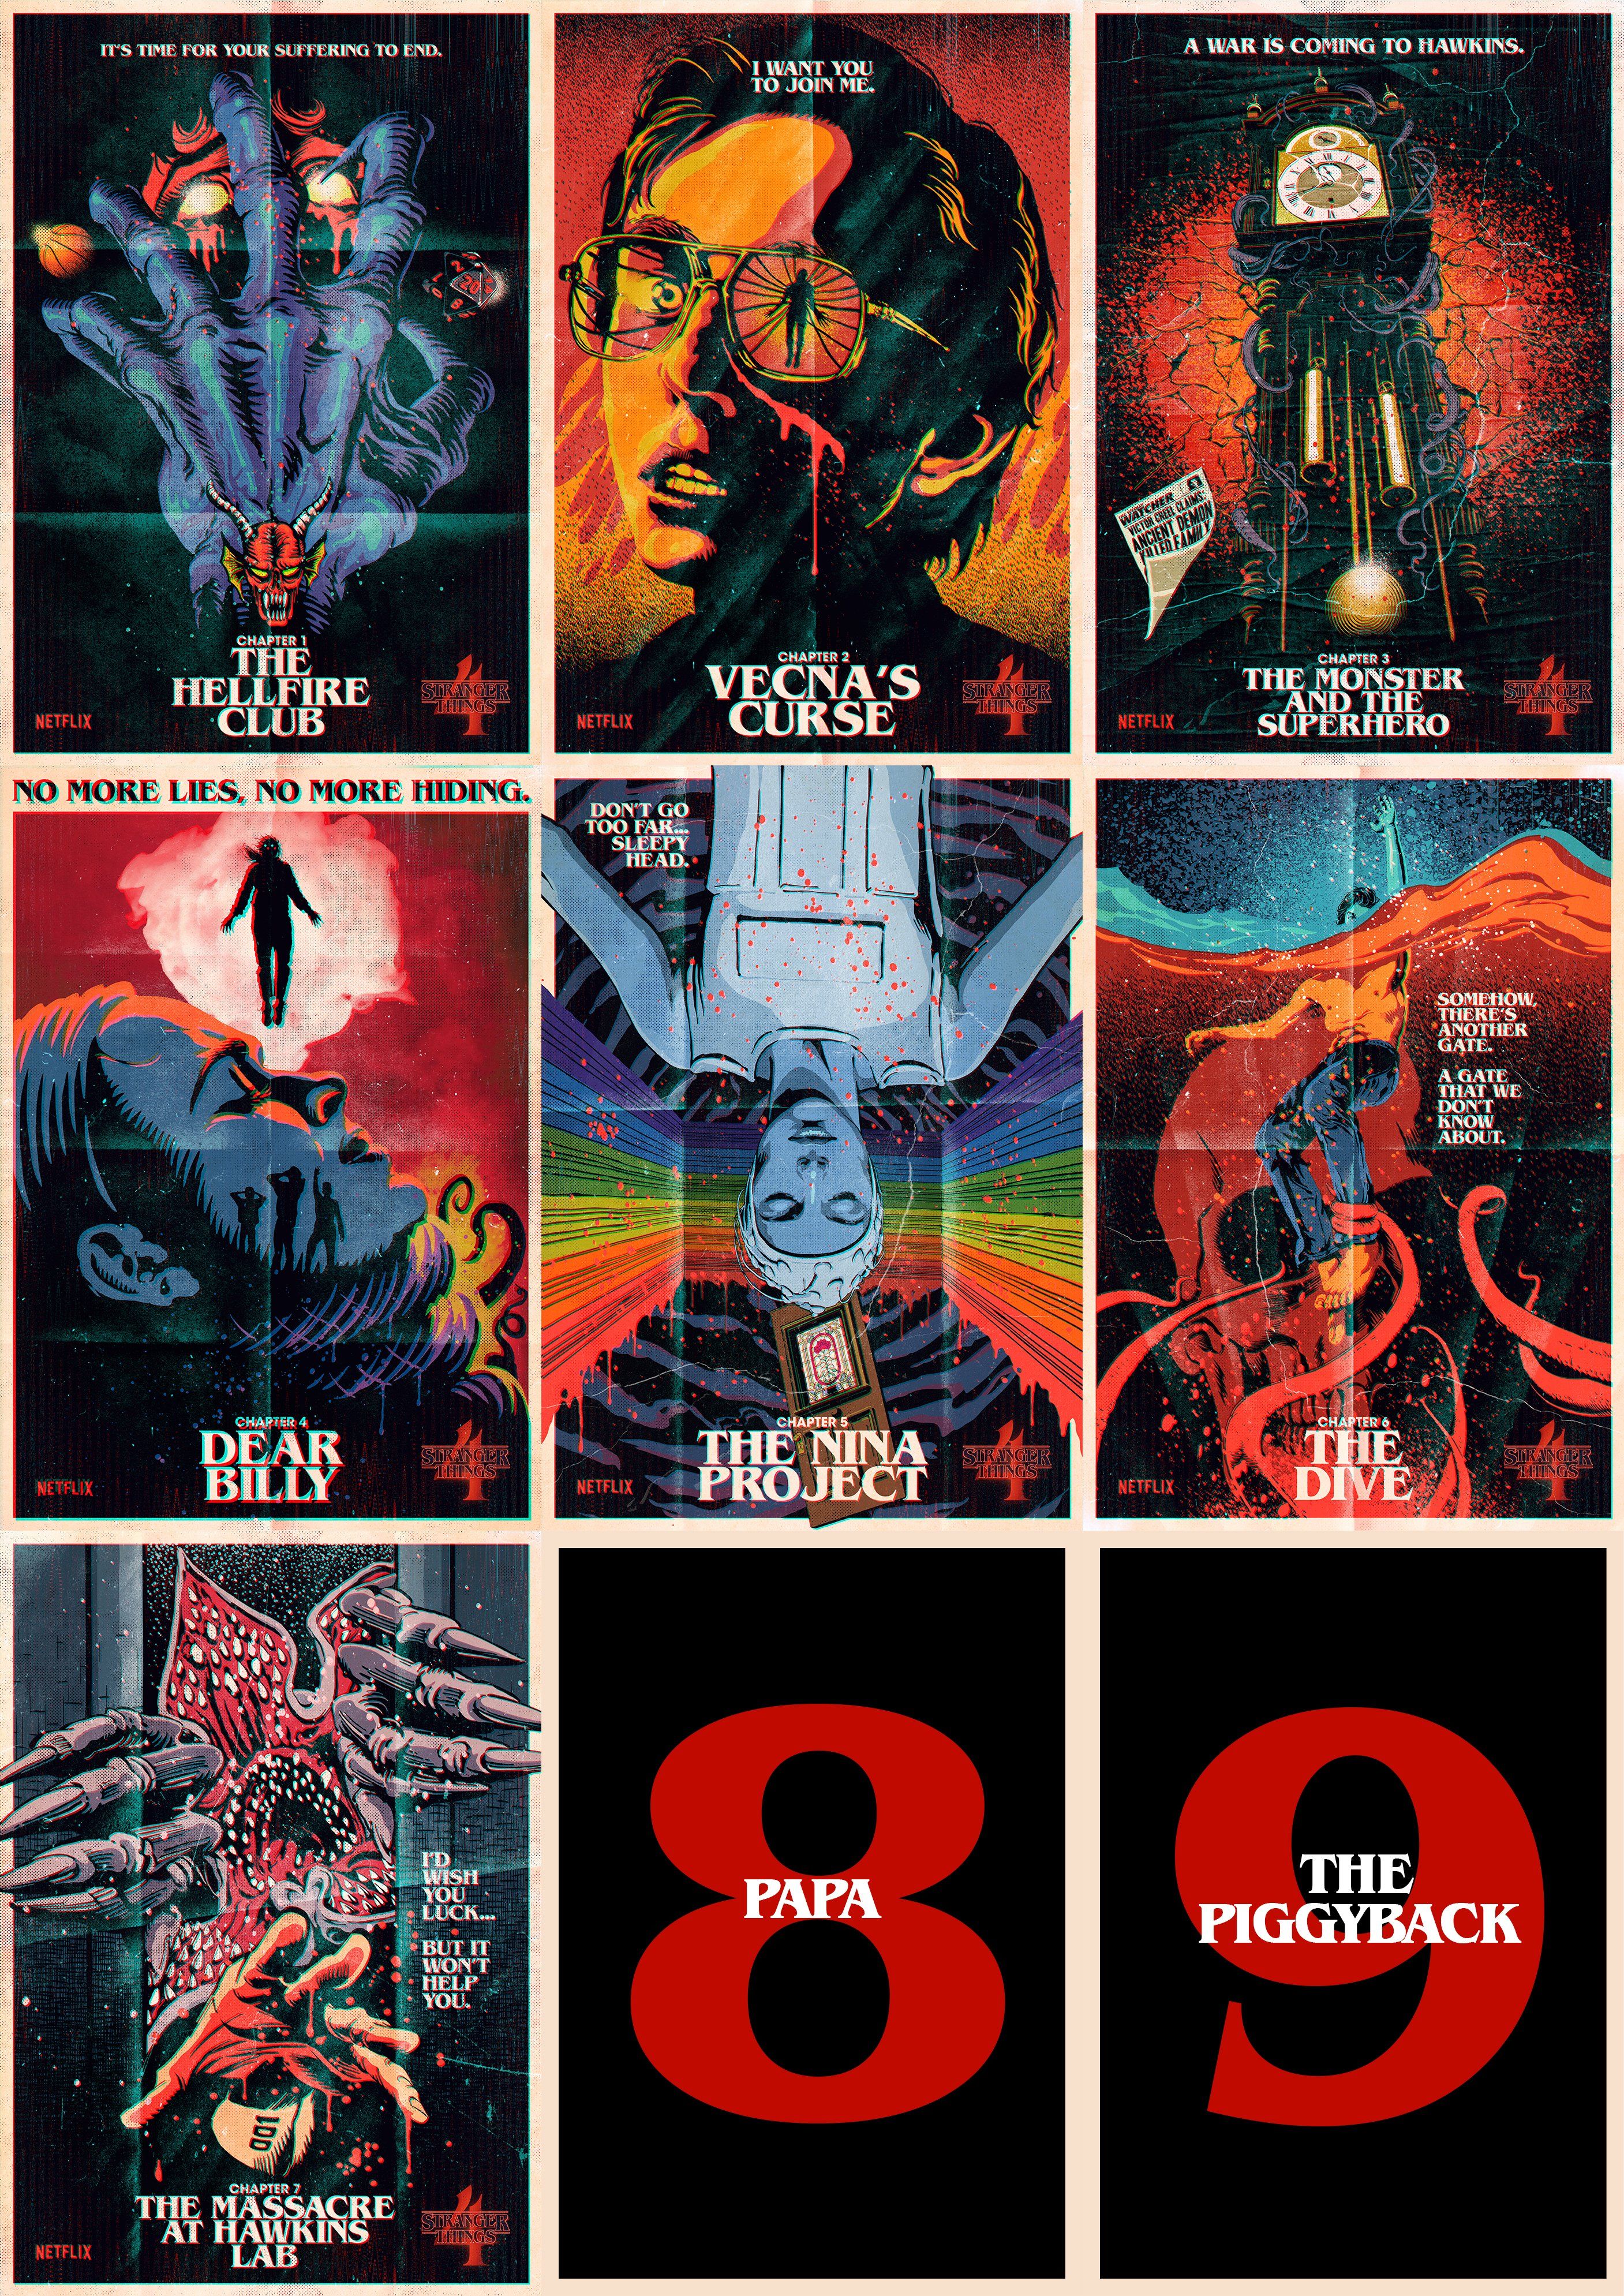 Stranger Things S4 Episodes Get Their Own Stunning Horror Movie Poster